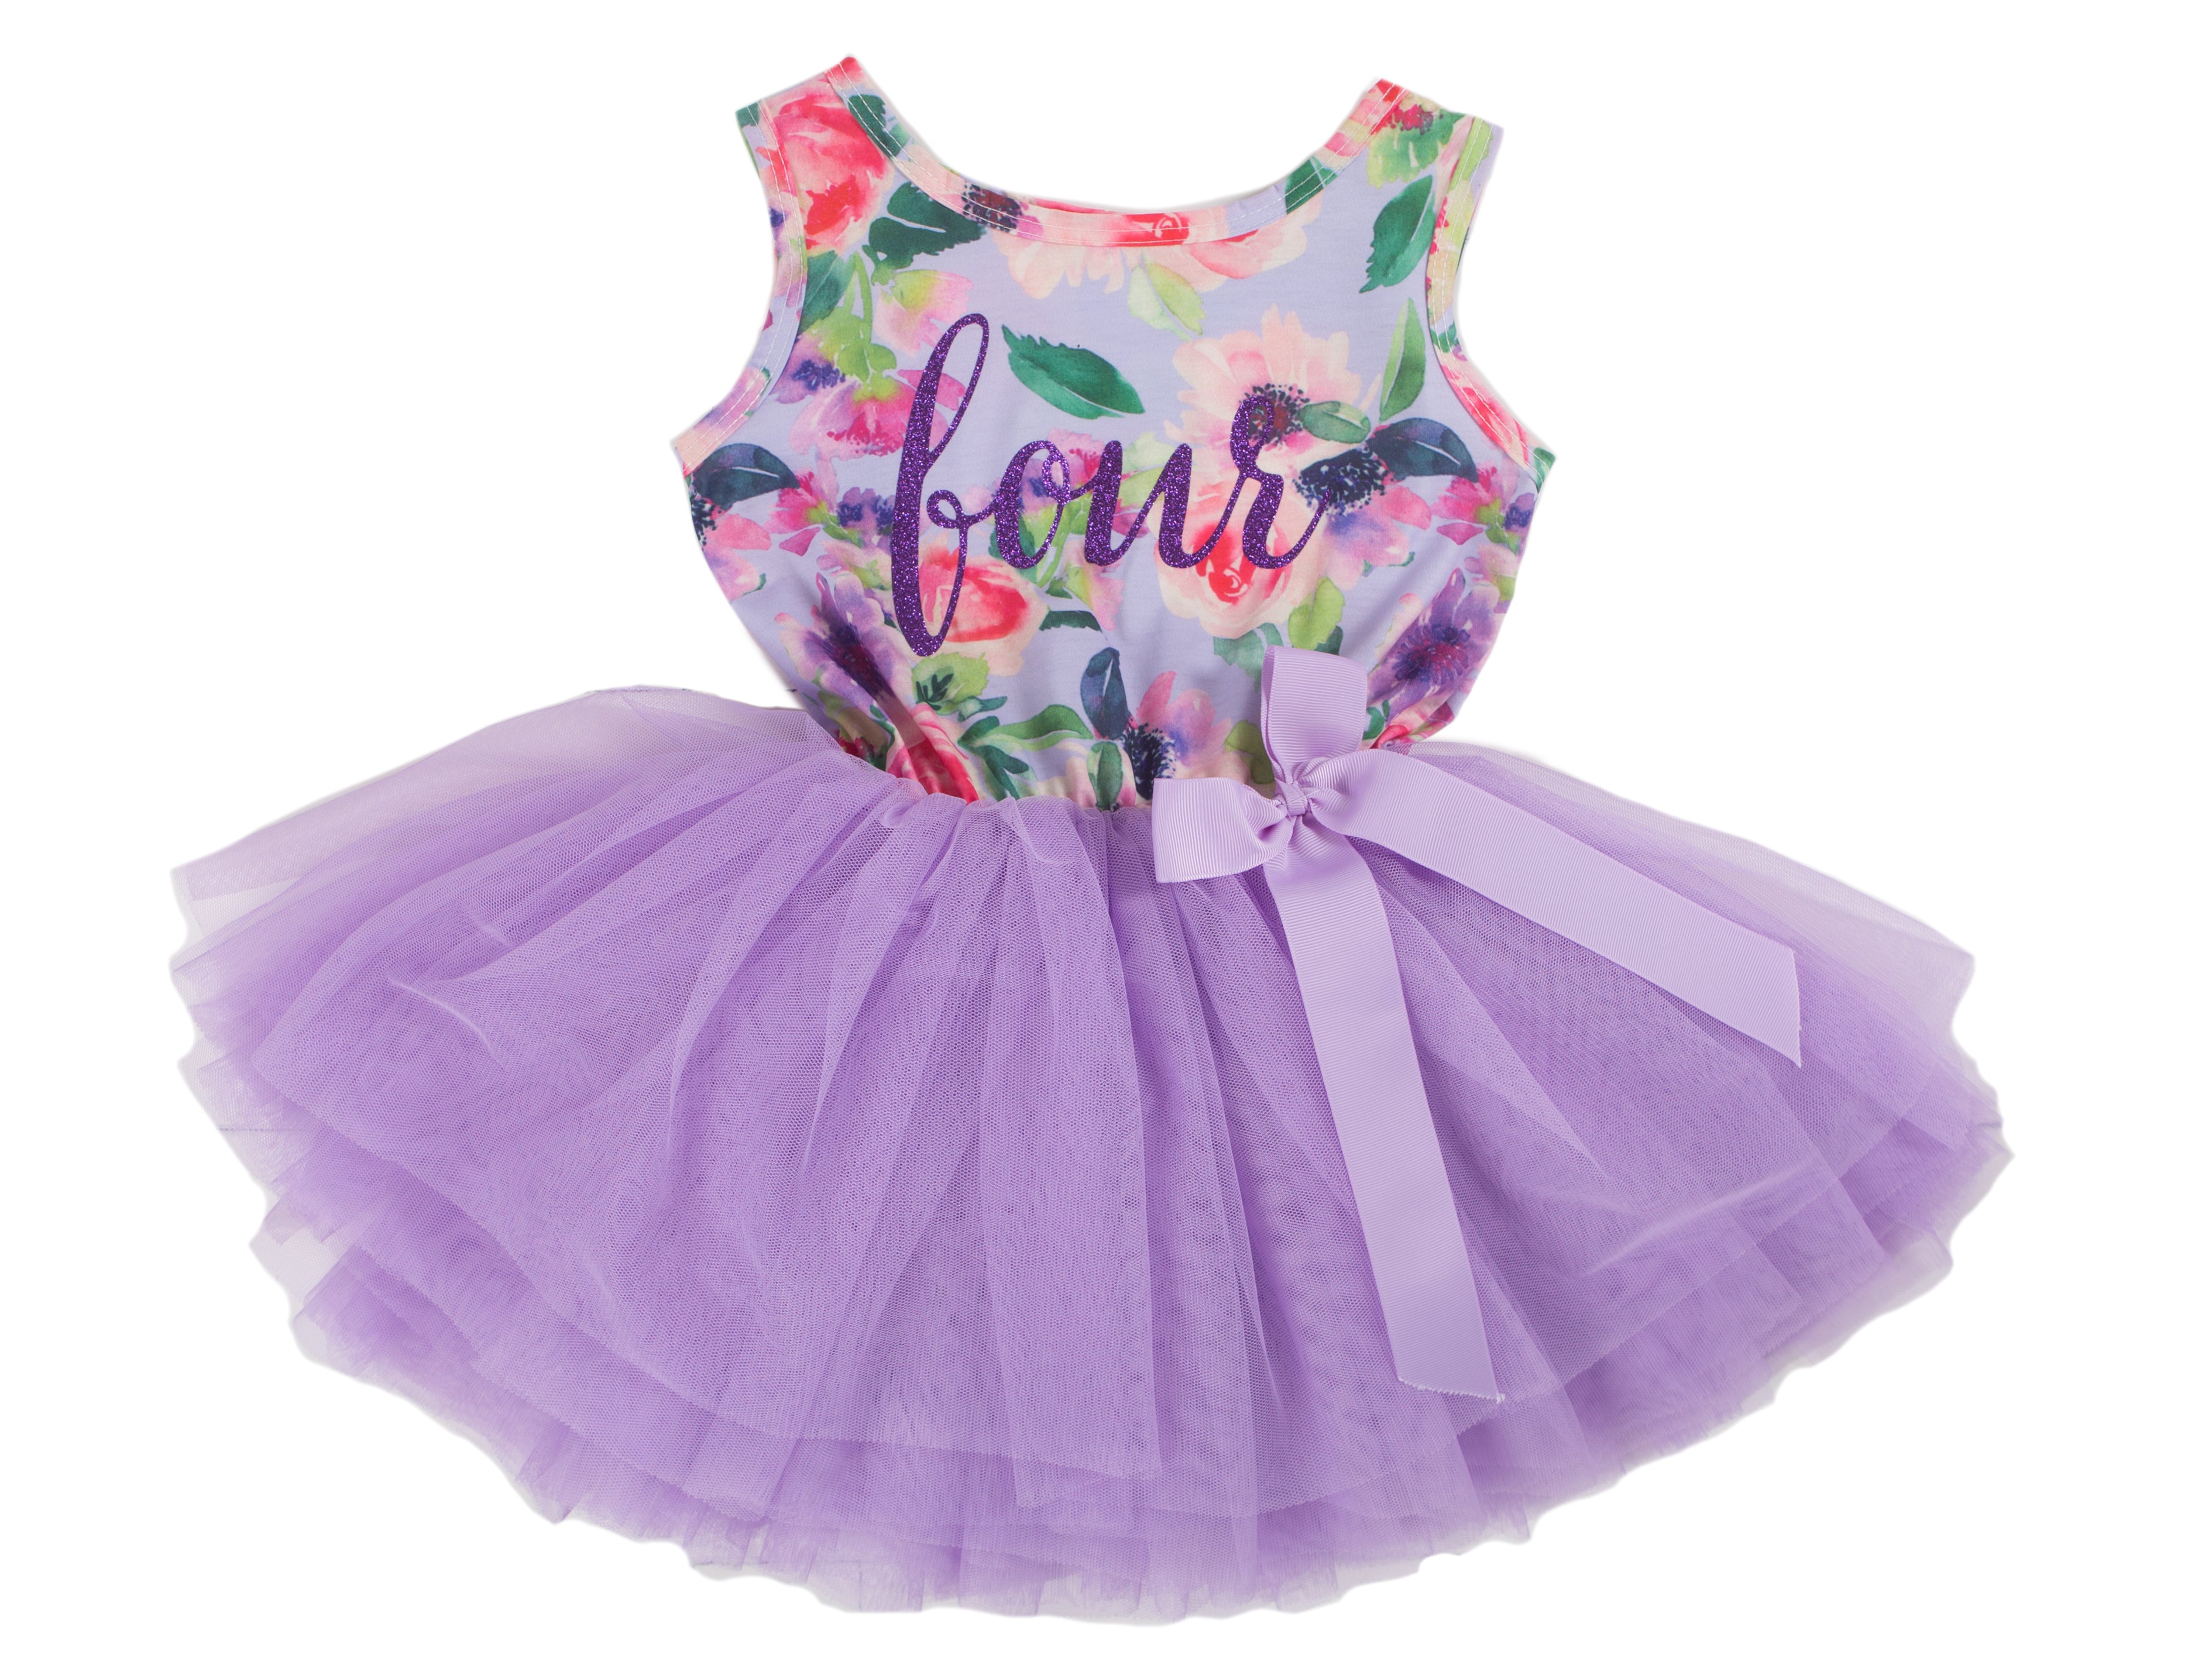 4th Birthday Dress - Floral Heart (Sleeveless) - Grace and Lucille